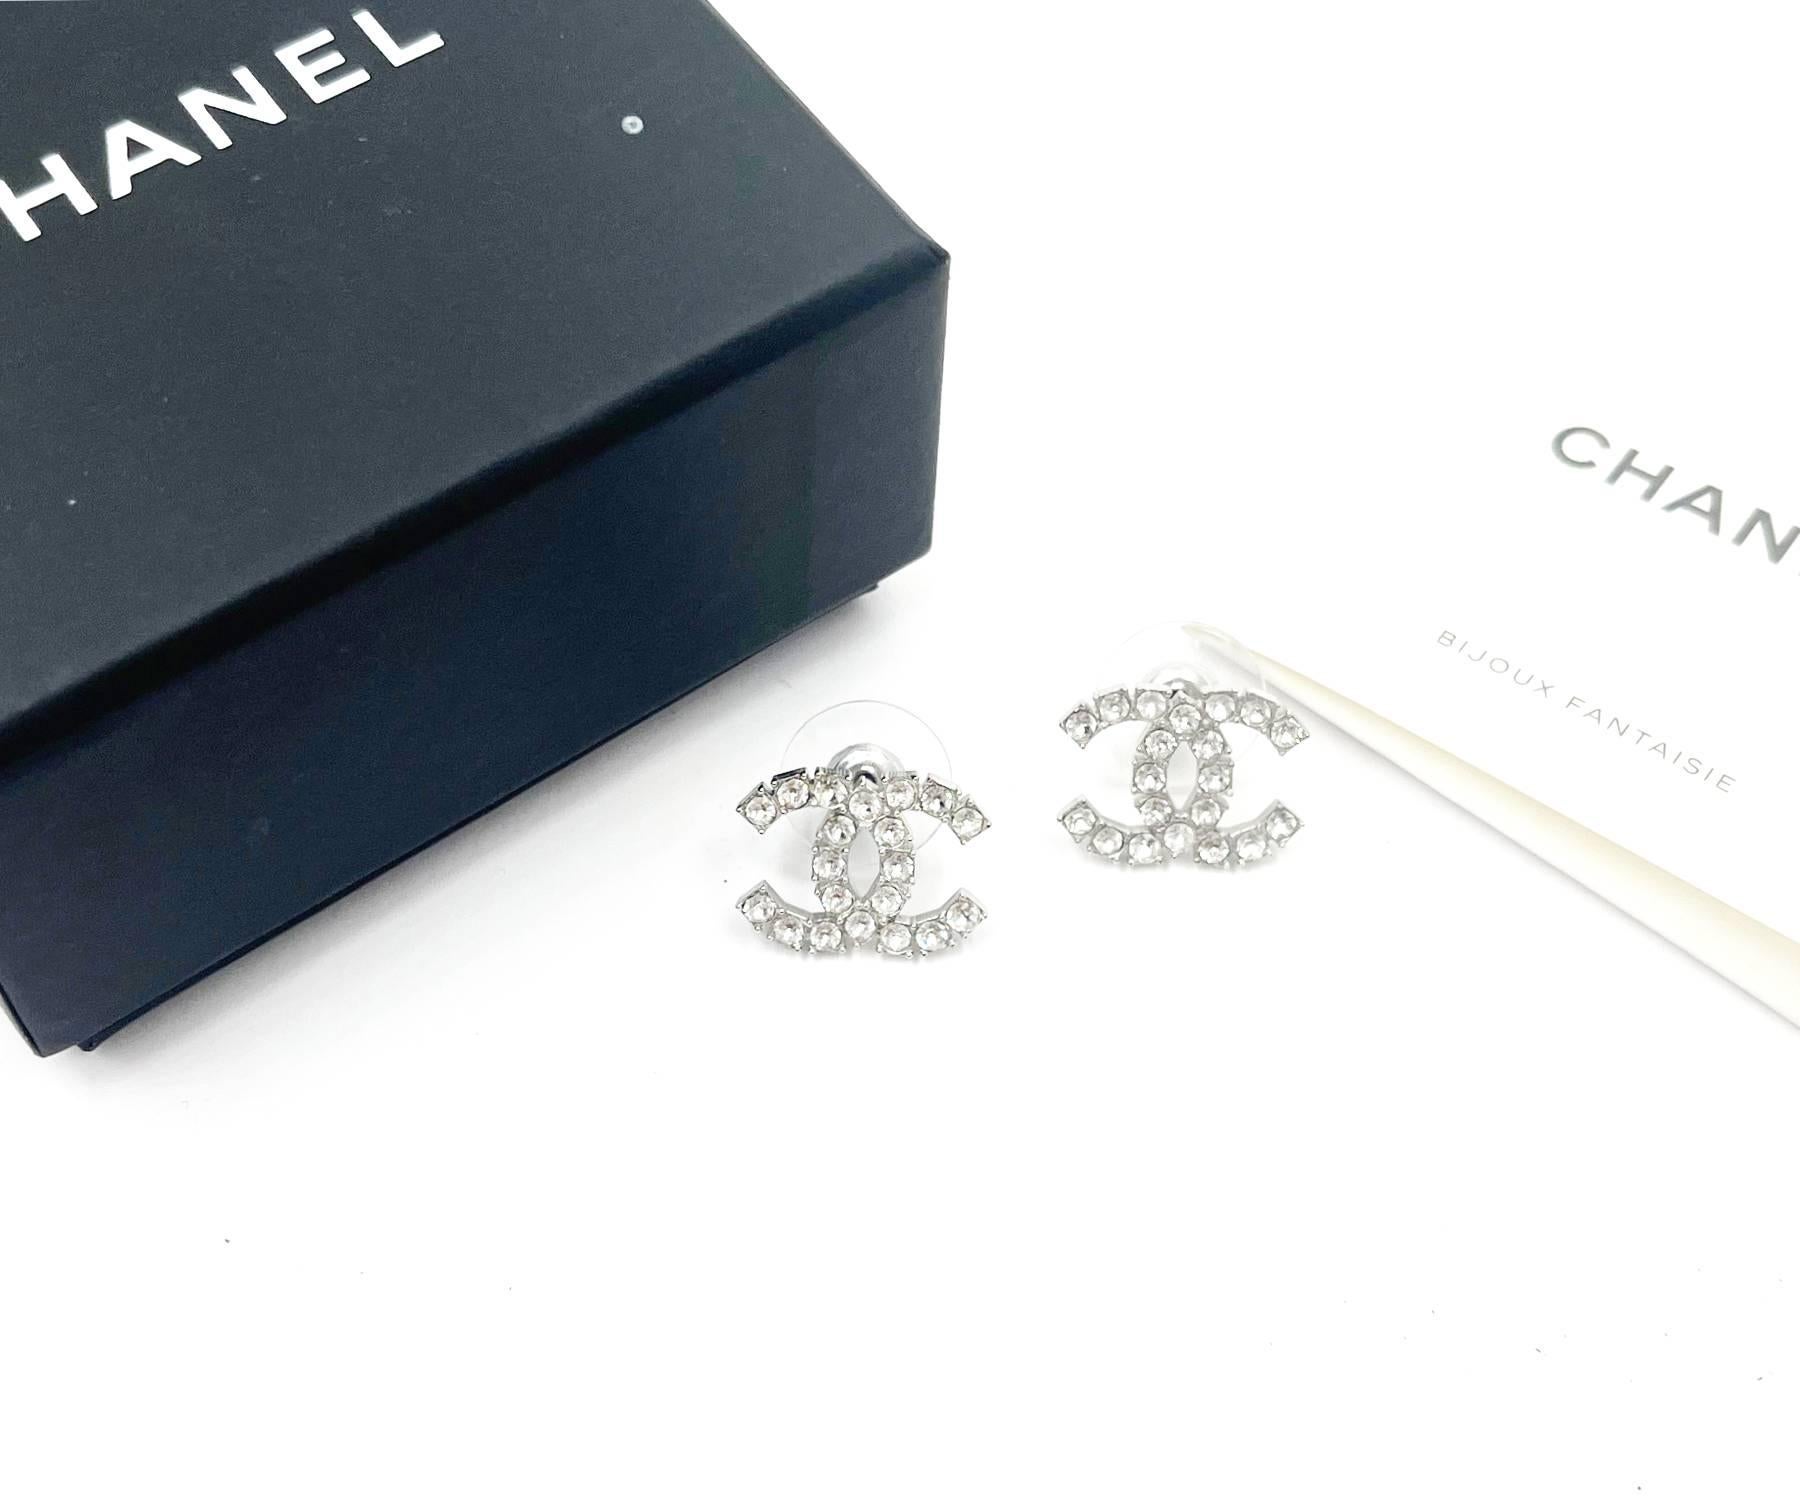 Artisan Chanel Brand New Silver CC Rocky Crystal Reissued Piercing Earrings   For Sale